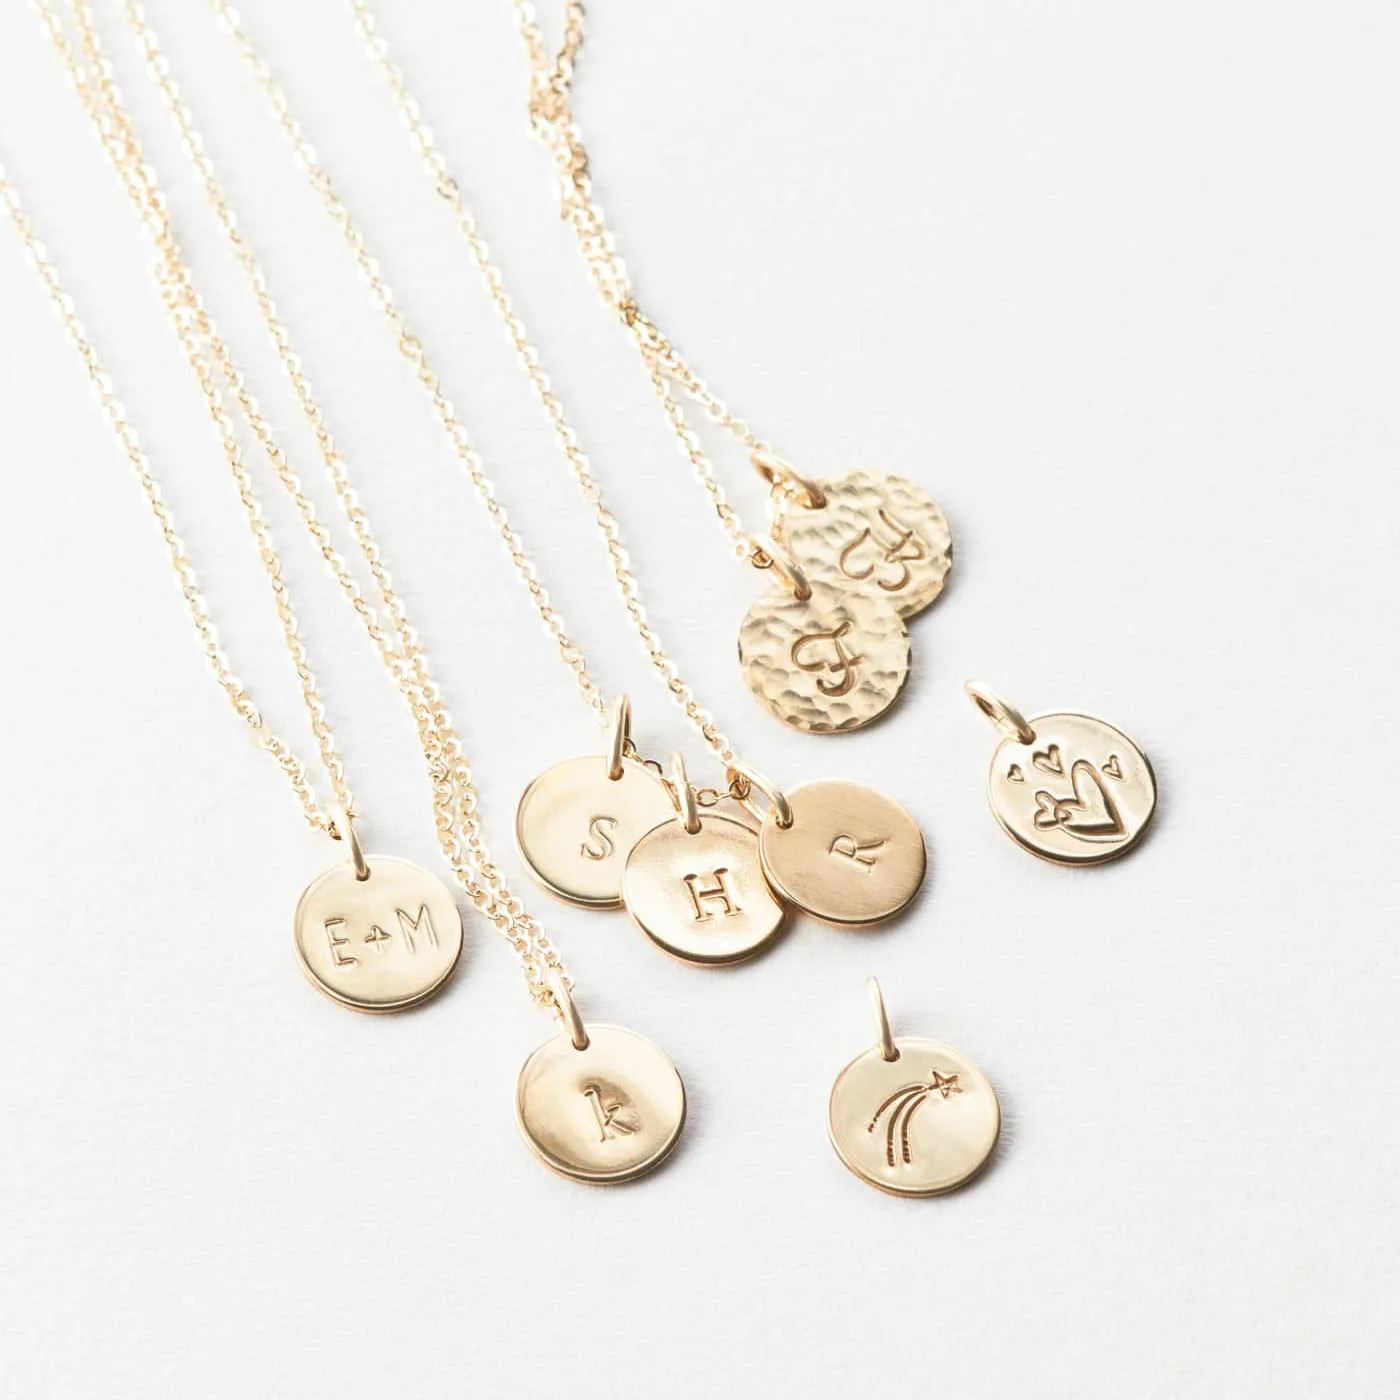 Personalized Lor Necklace